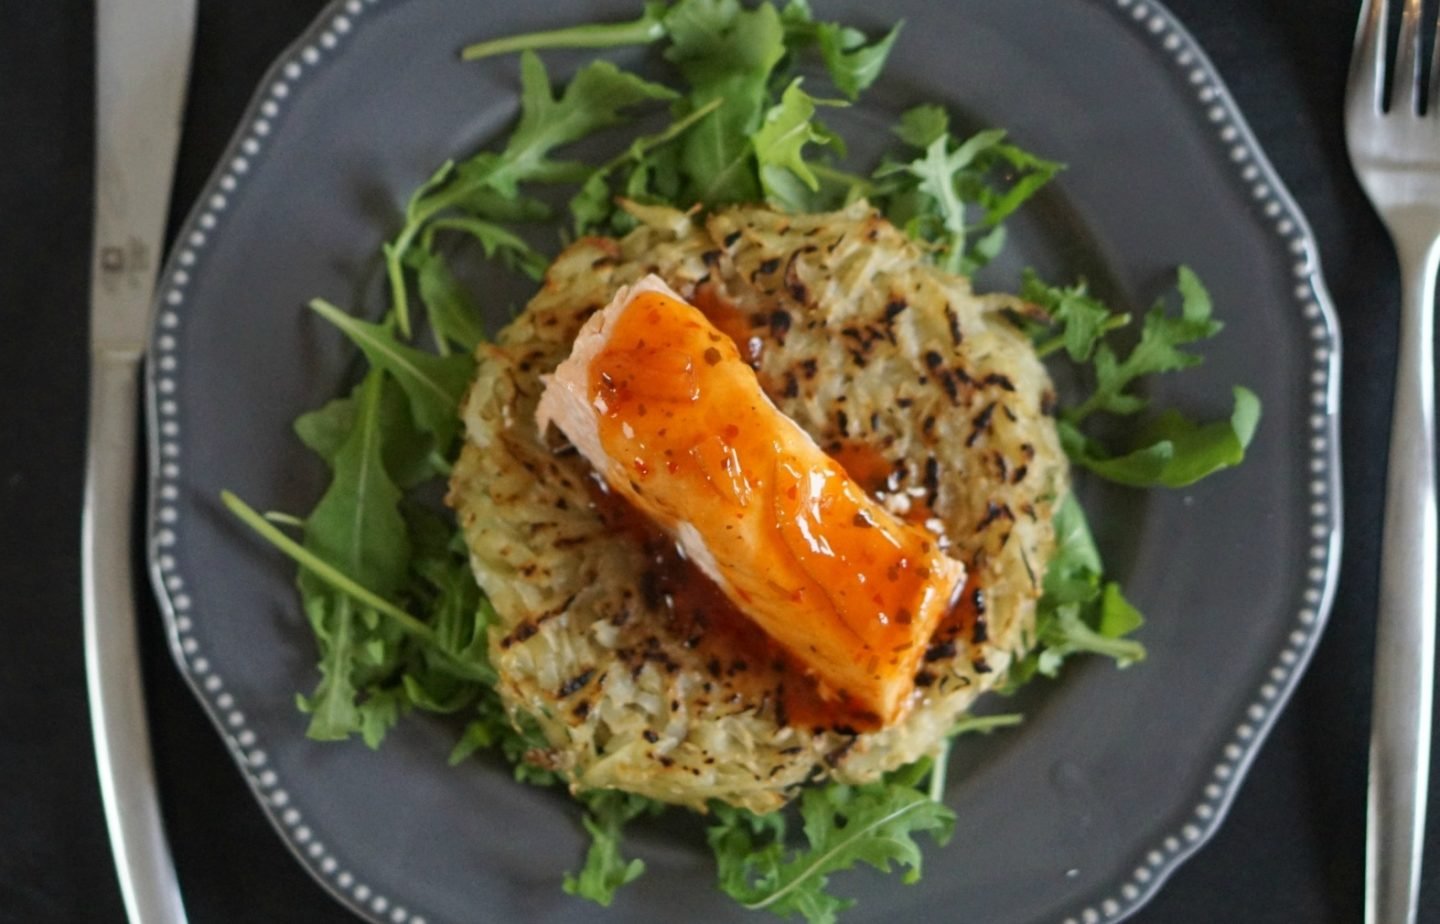 Salmon and hash brown on a bed of rocket www.extraordinarychaos.com